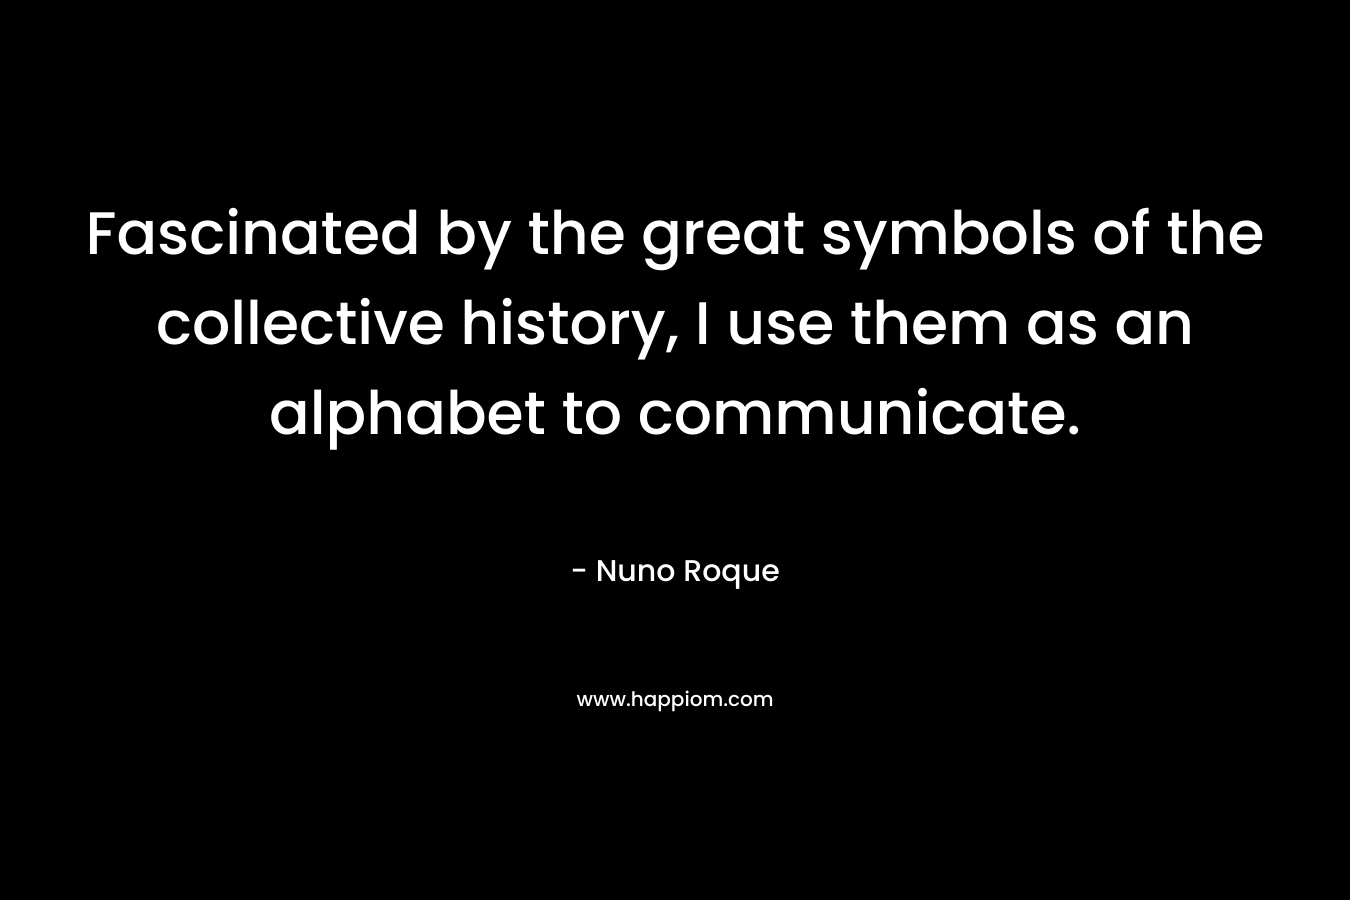 Fascinated by the great symbols of the collective history, I use them as an alphabet to communicate. – Nuno Roque